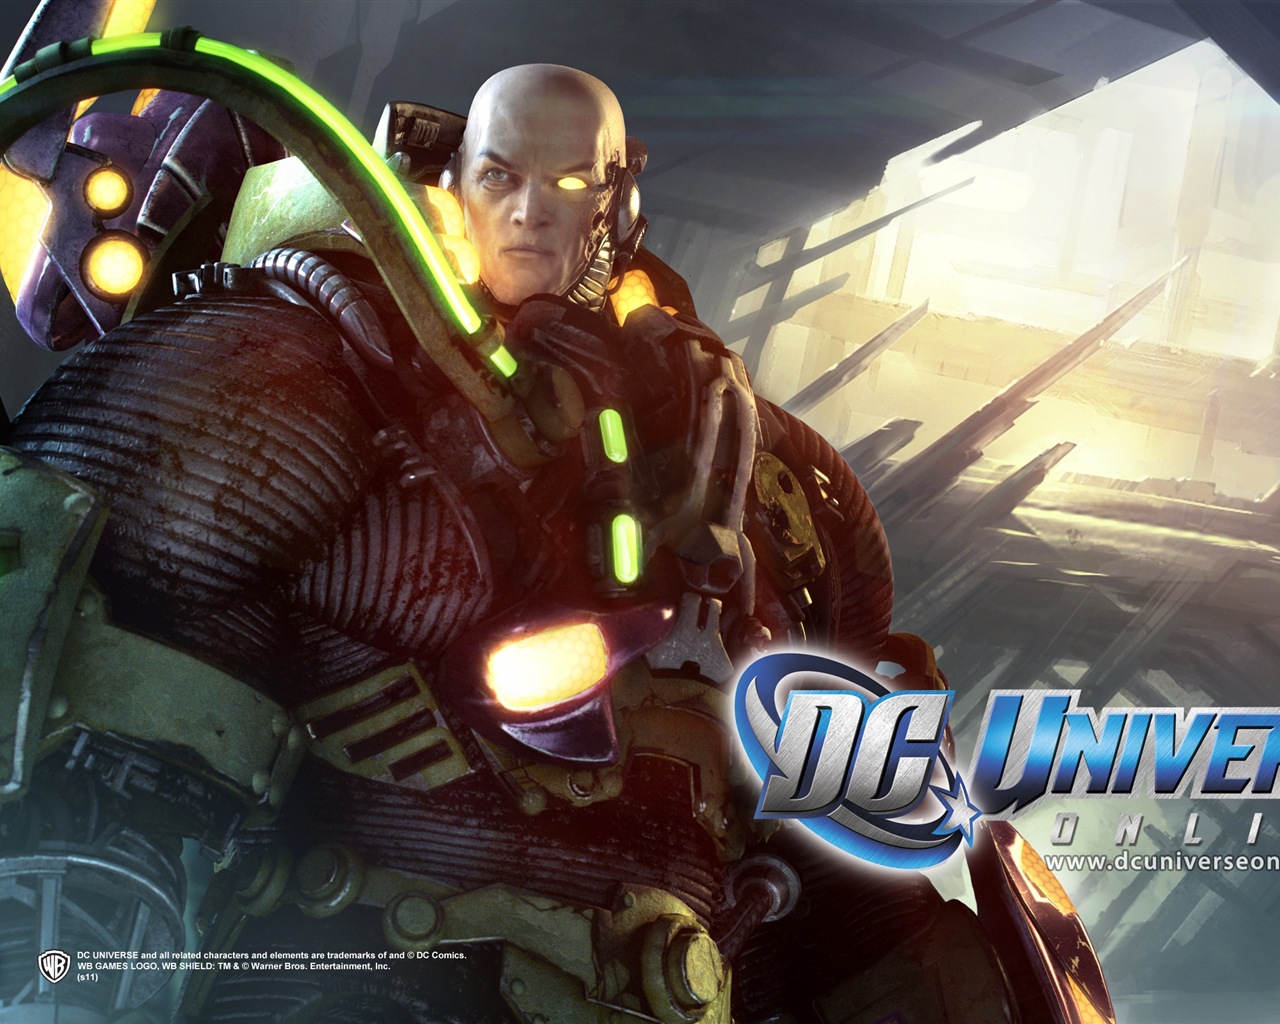 DC Universe Online HD game wallpapers #6 - 1280x1024